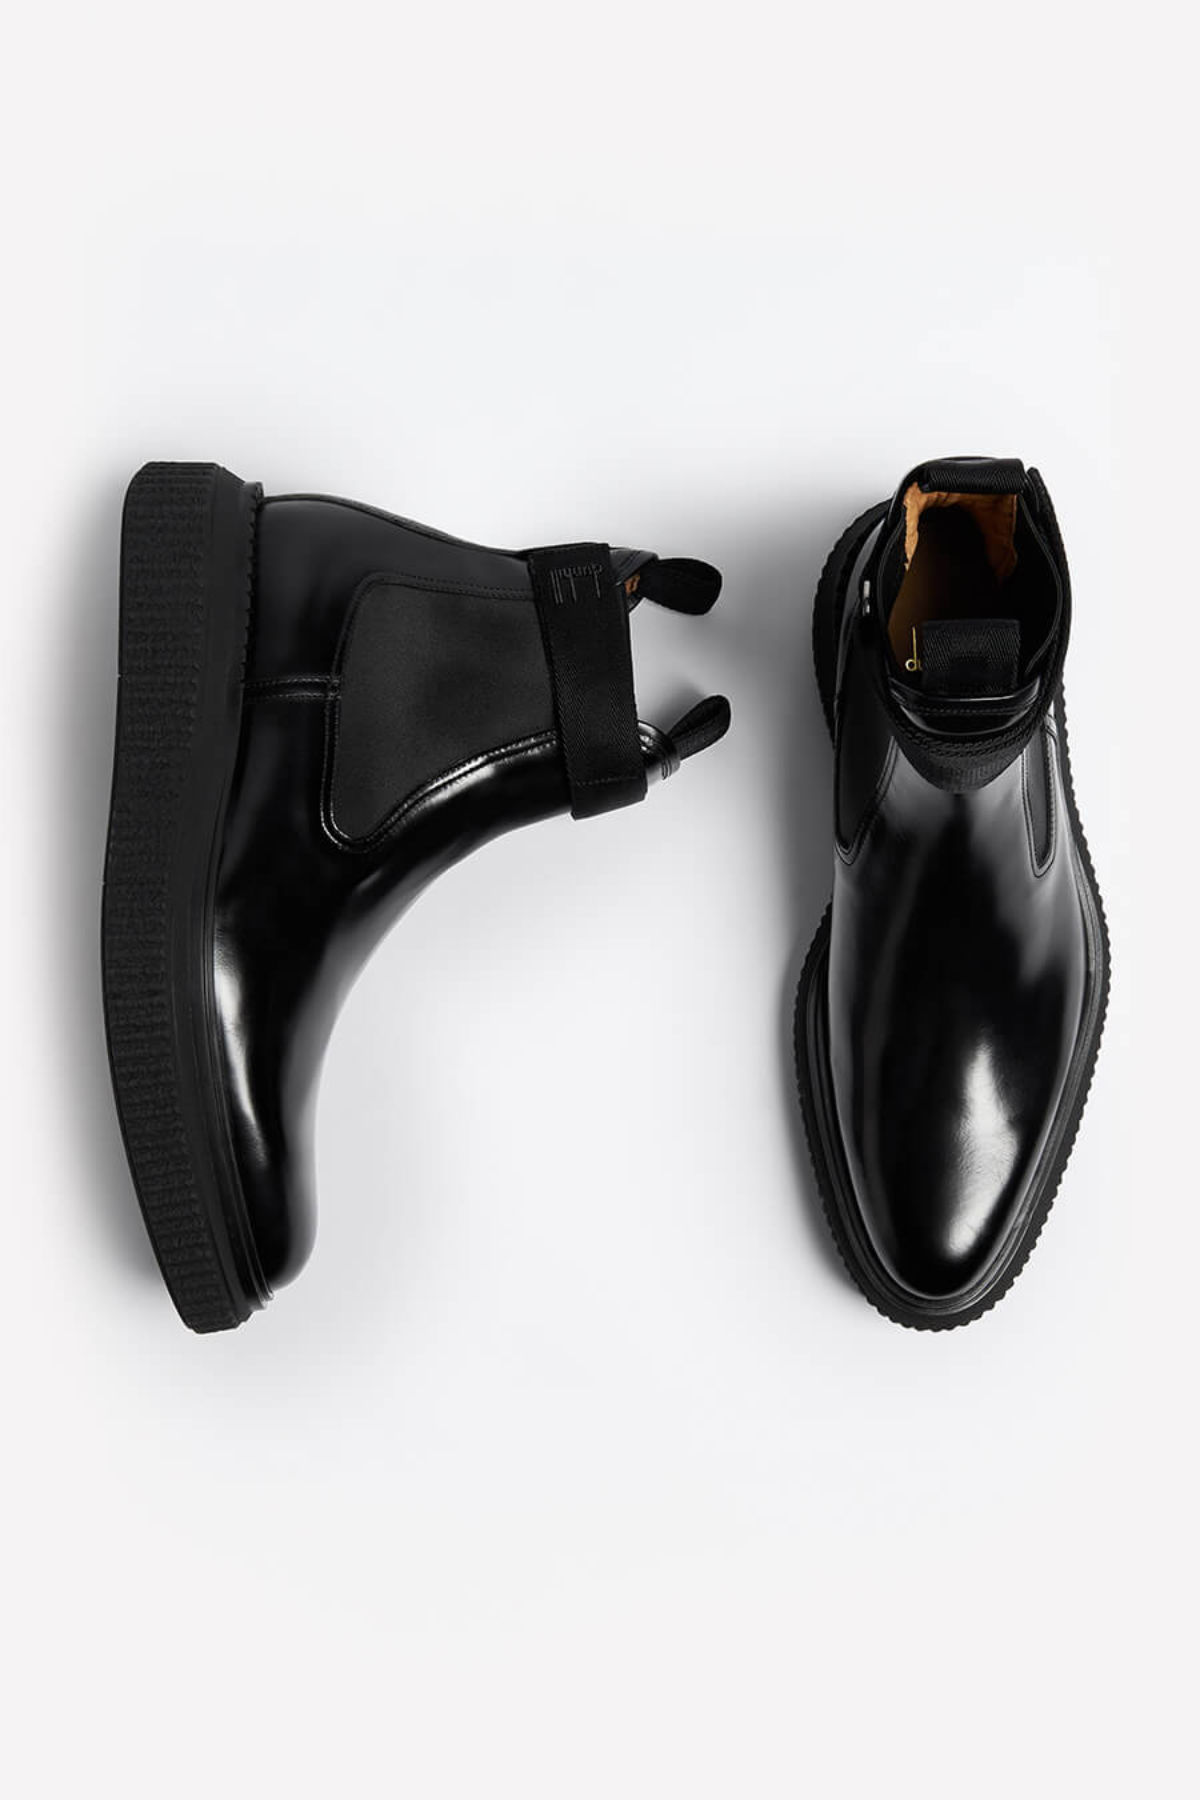 dunhill Introduces Its New Footwear Collection For Autumn Winter 2021